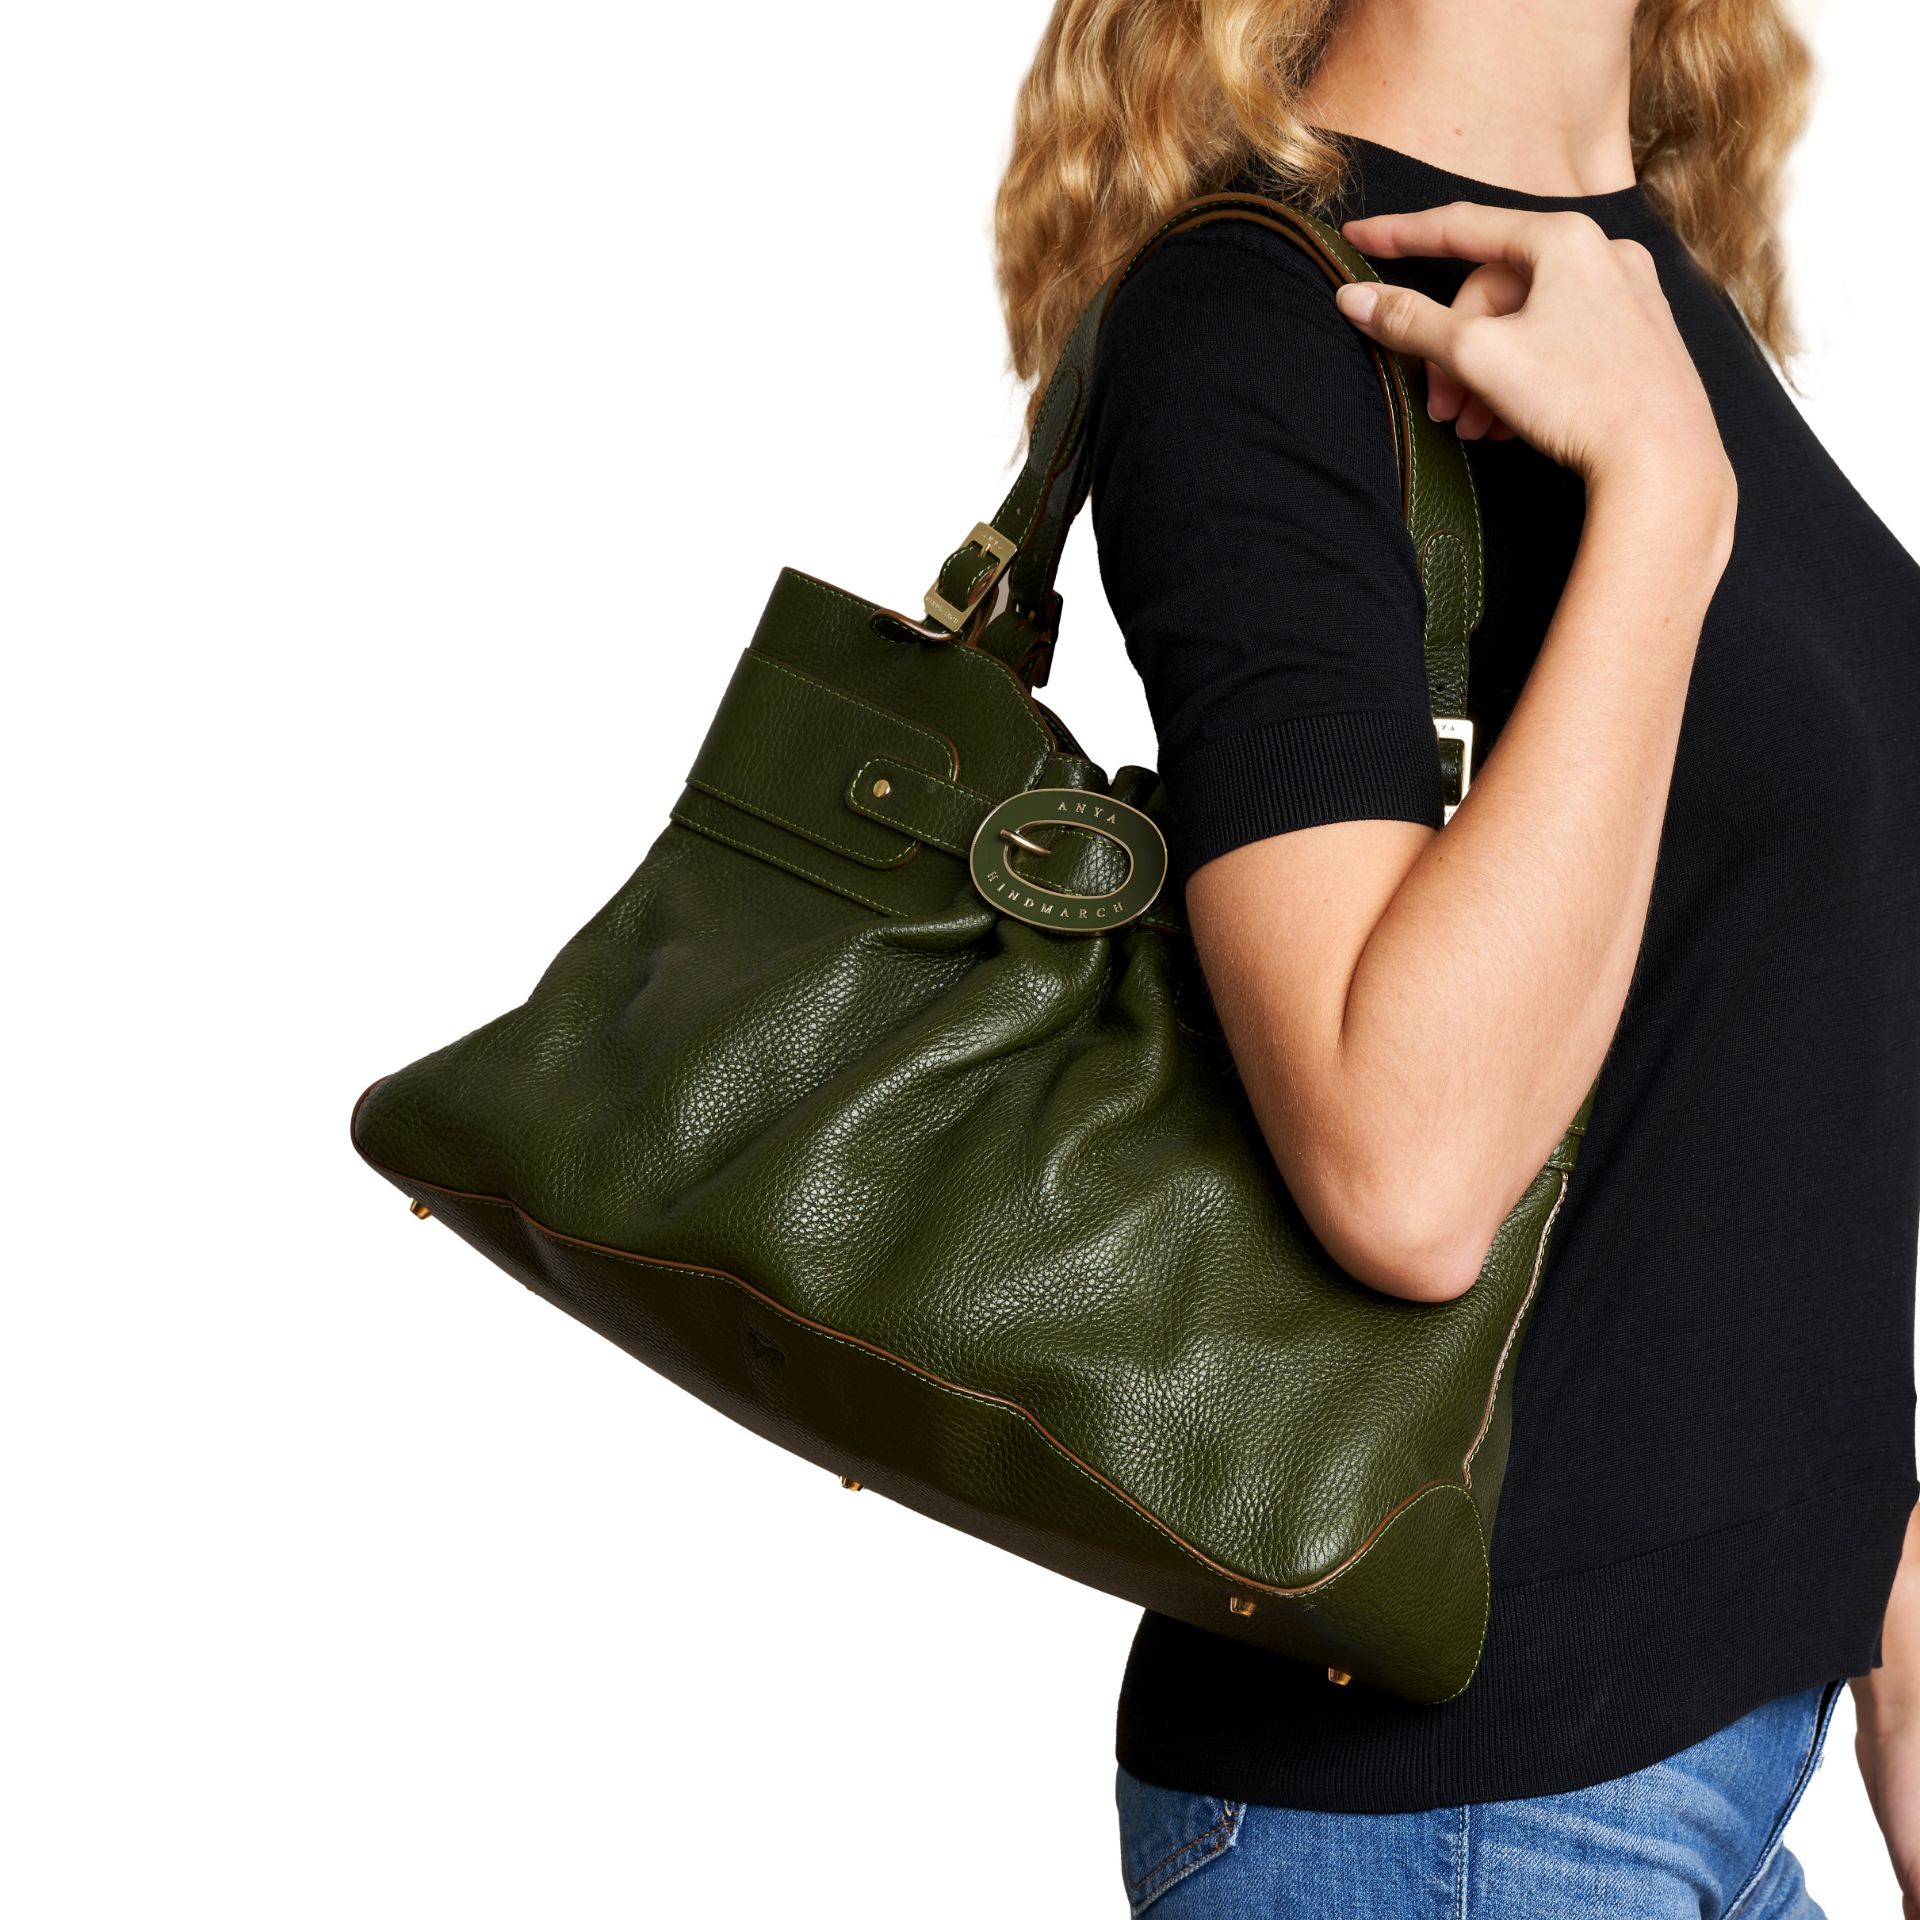 ANYA HINDMARCH FOREST GREEN LEATHER BAG - Image 3 of 3